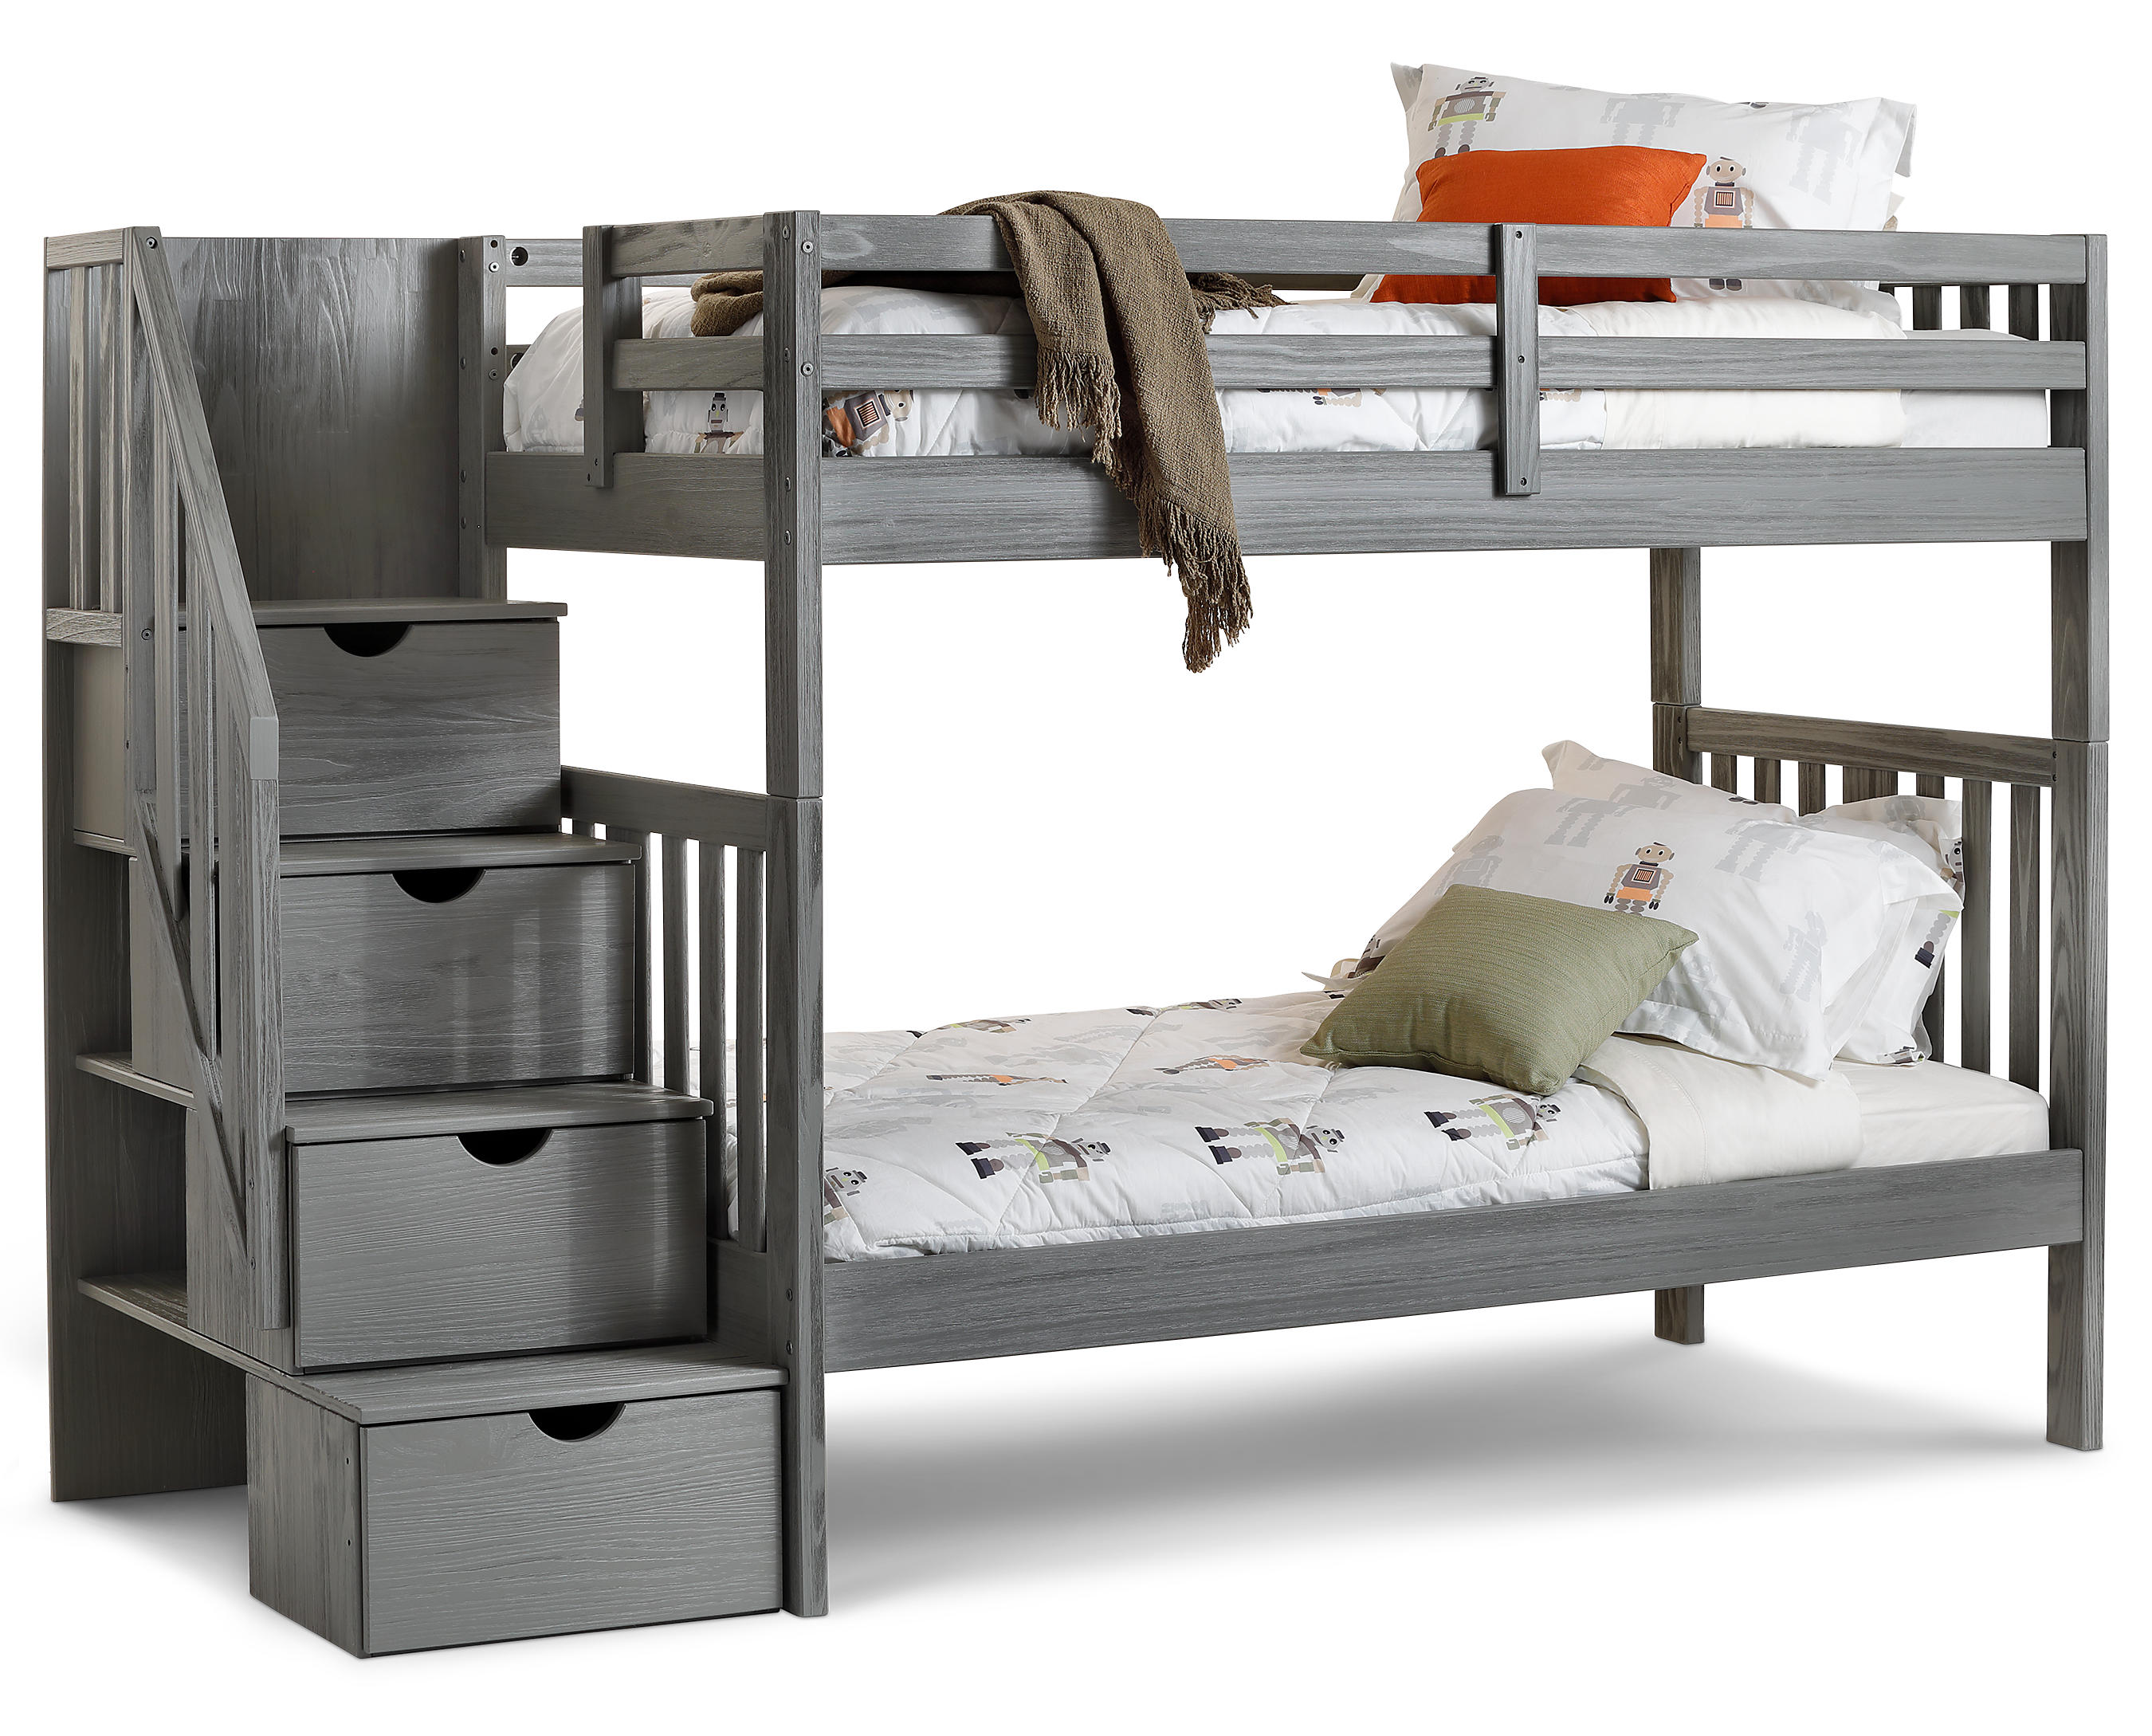 Dove Bunk Bed With Staircase, Full On Full Bunk Beds With Stairs